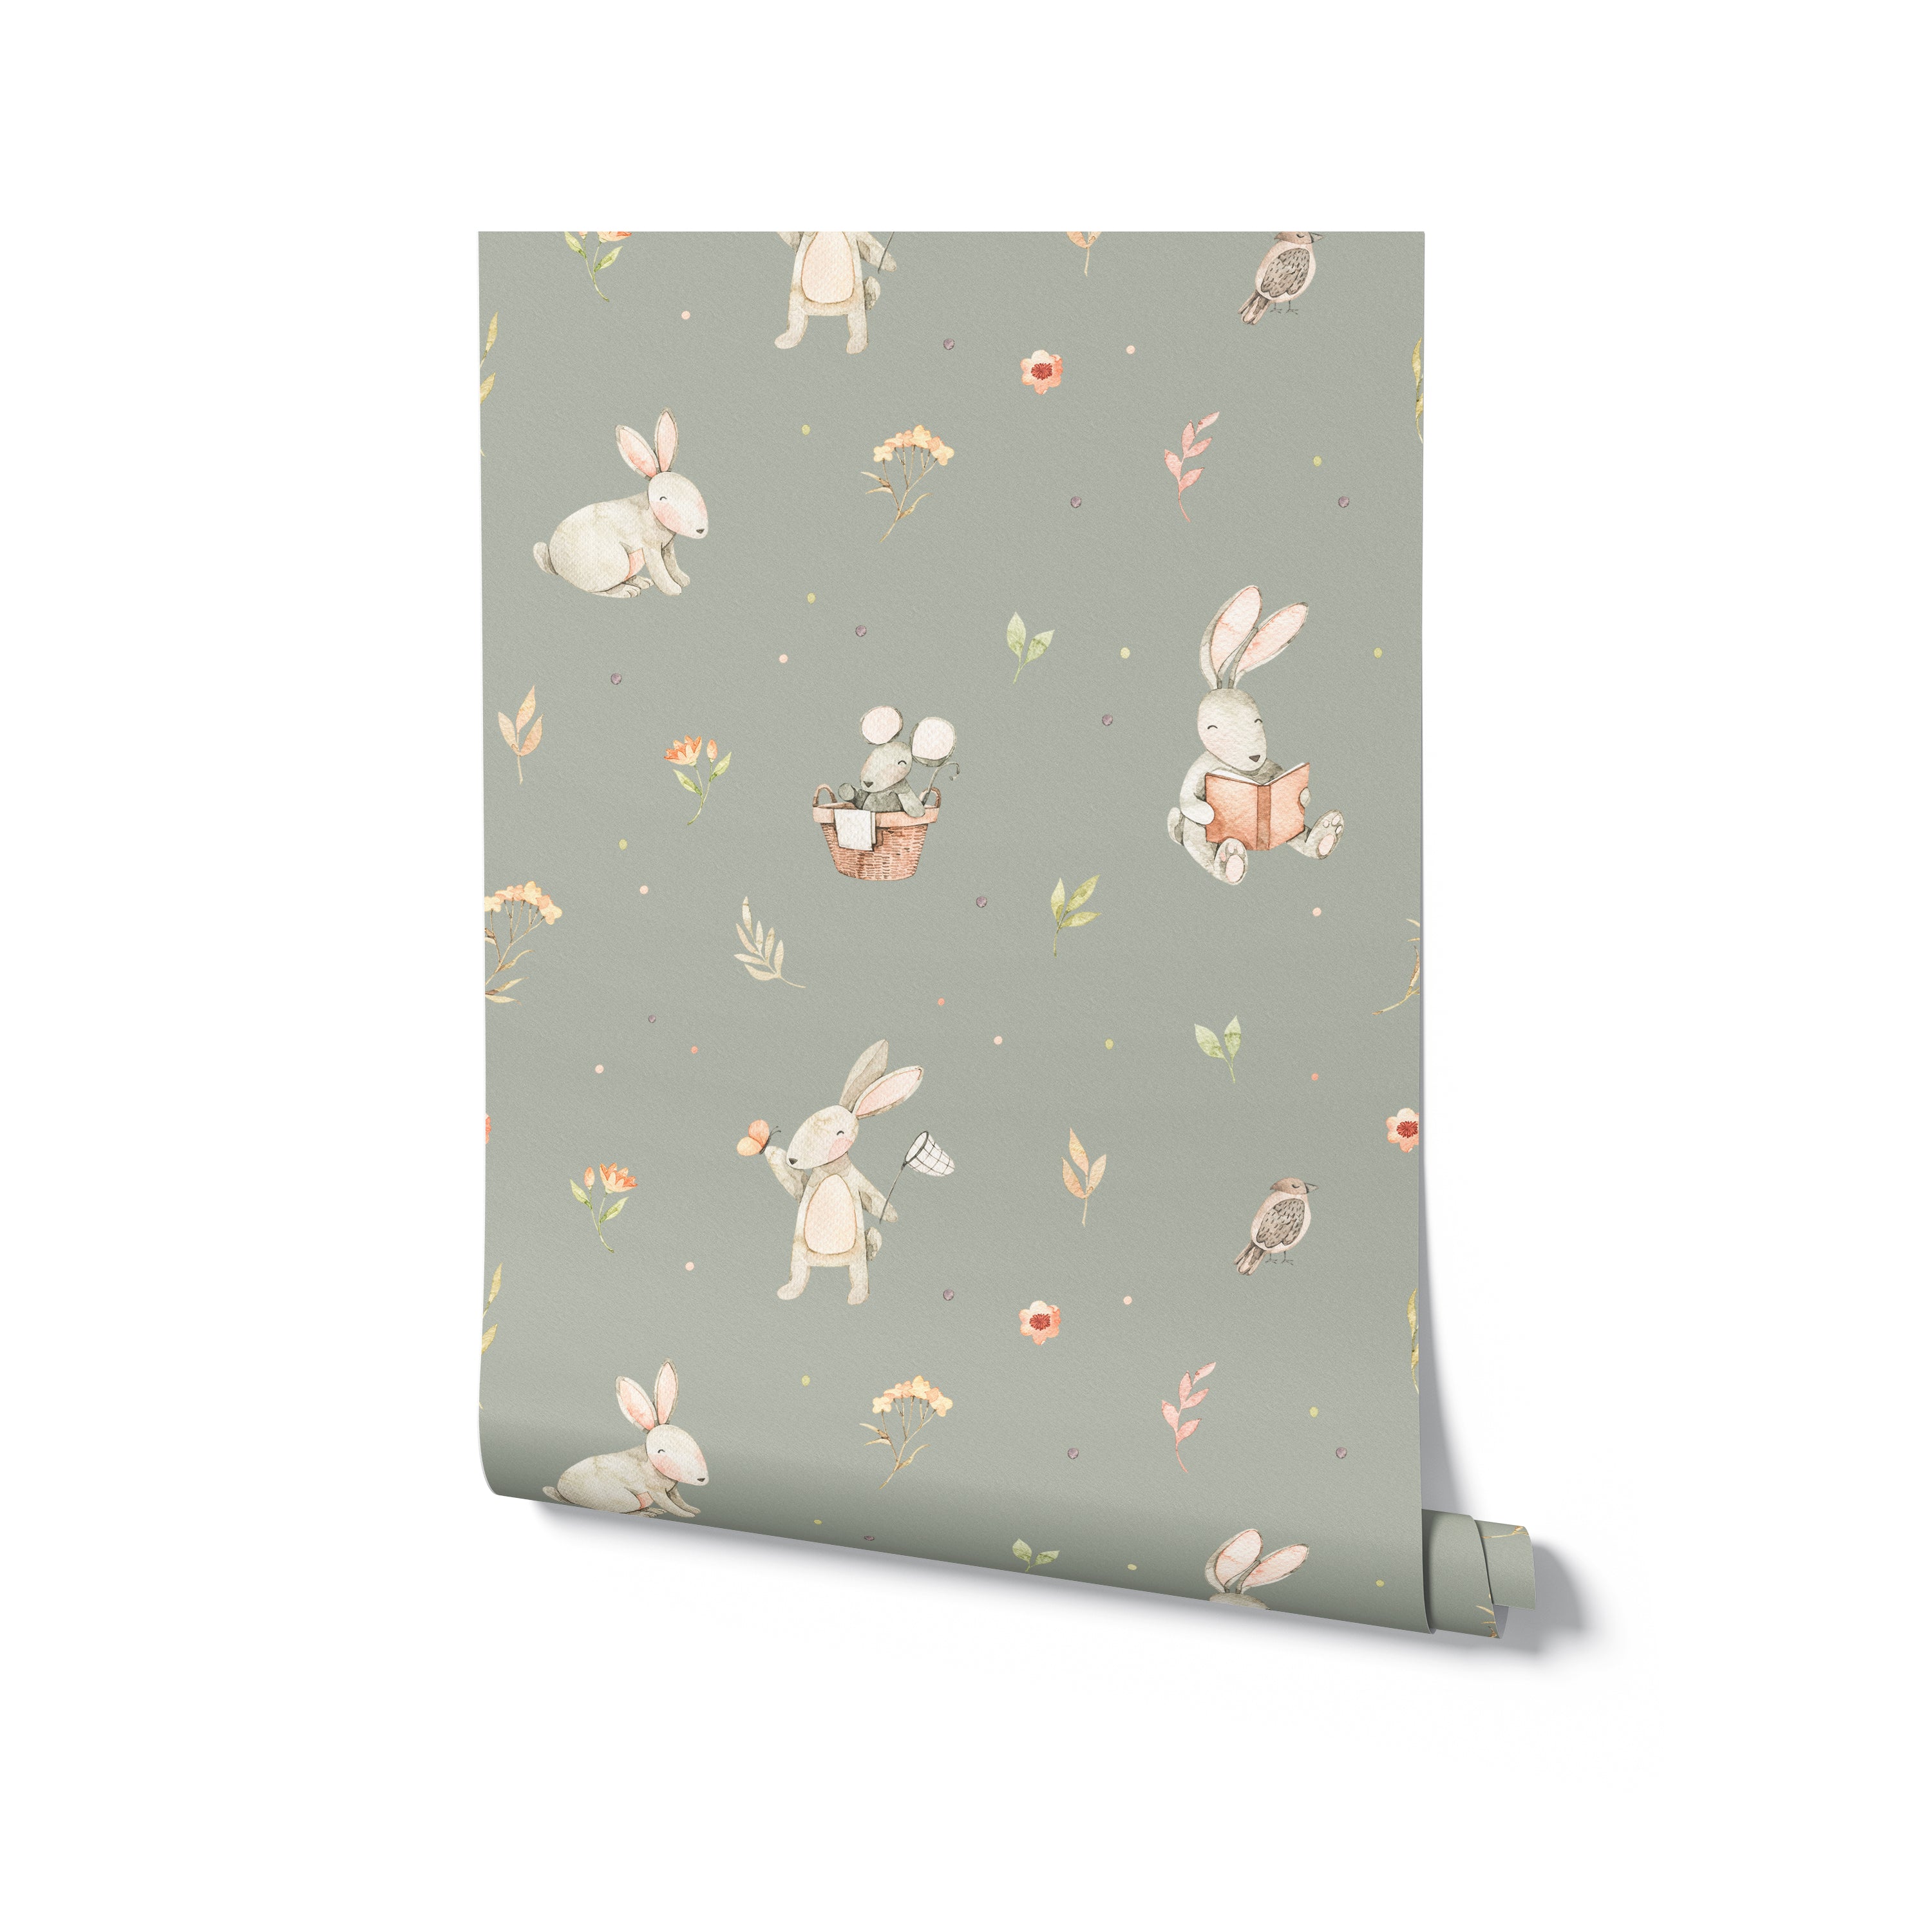 A roll of Watercolour Bunnies Wallpaper displaying the full pattern of adorable bunnies, tiny birds, and scattered foliage in pastel colors. This design is perfect for adding a touch of whimsy and nature to children’s rooms or play areas